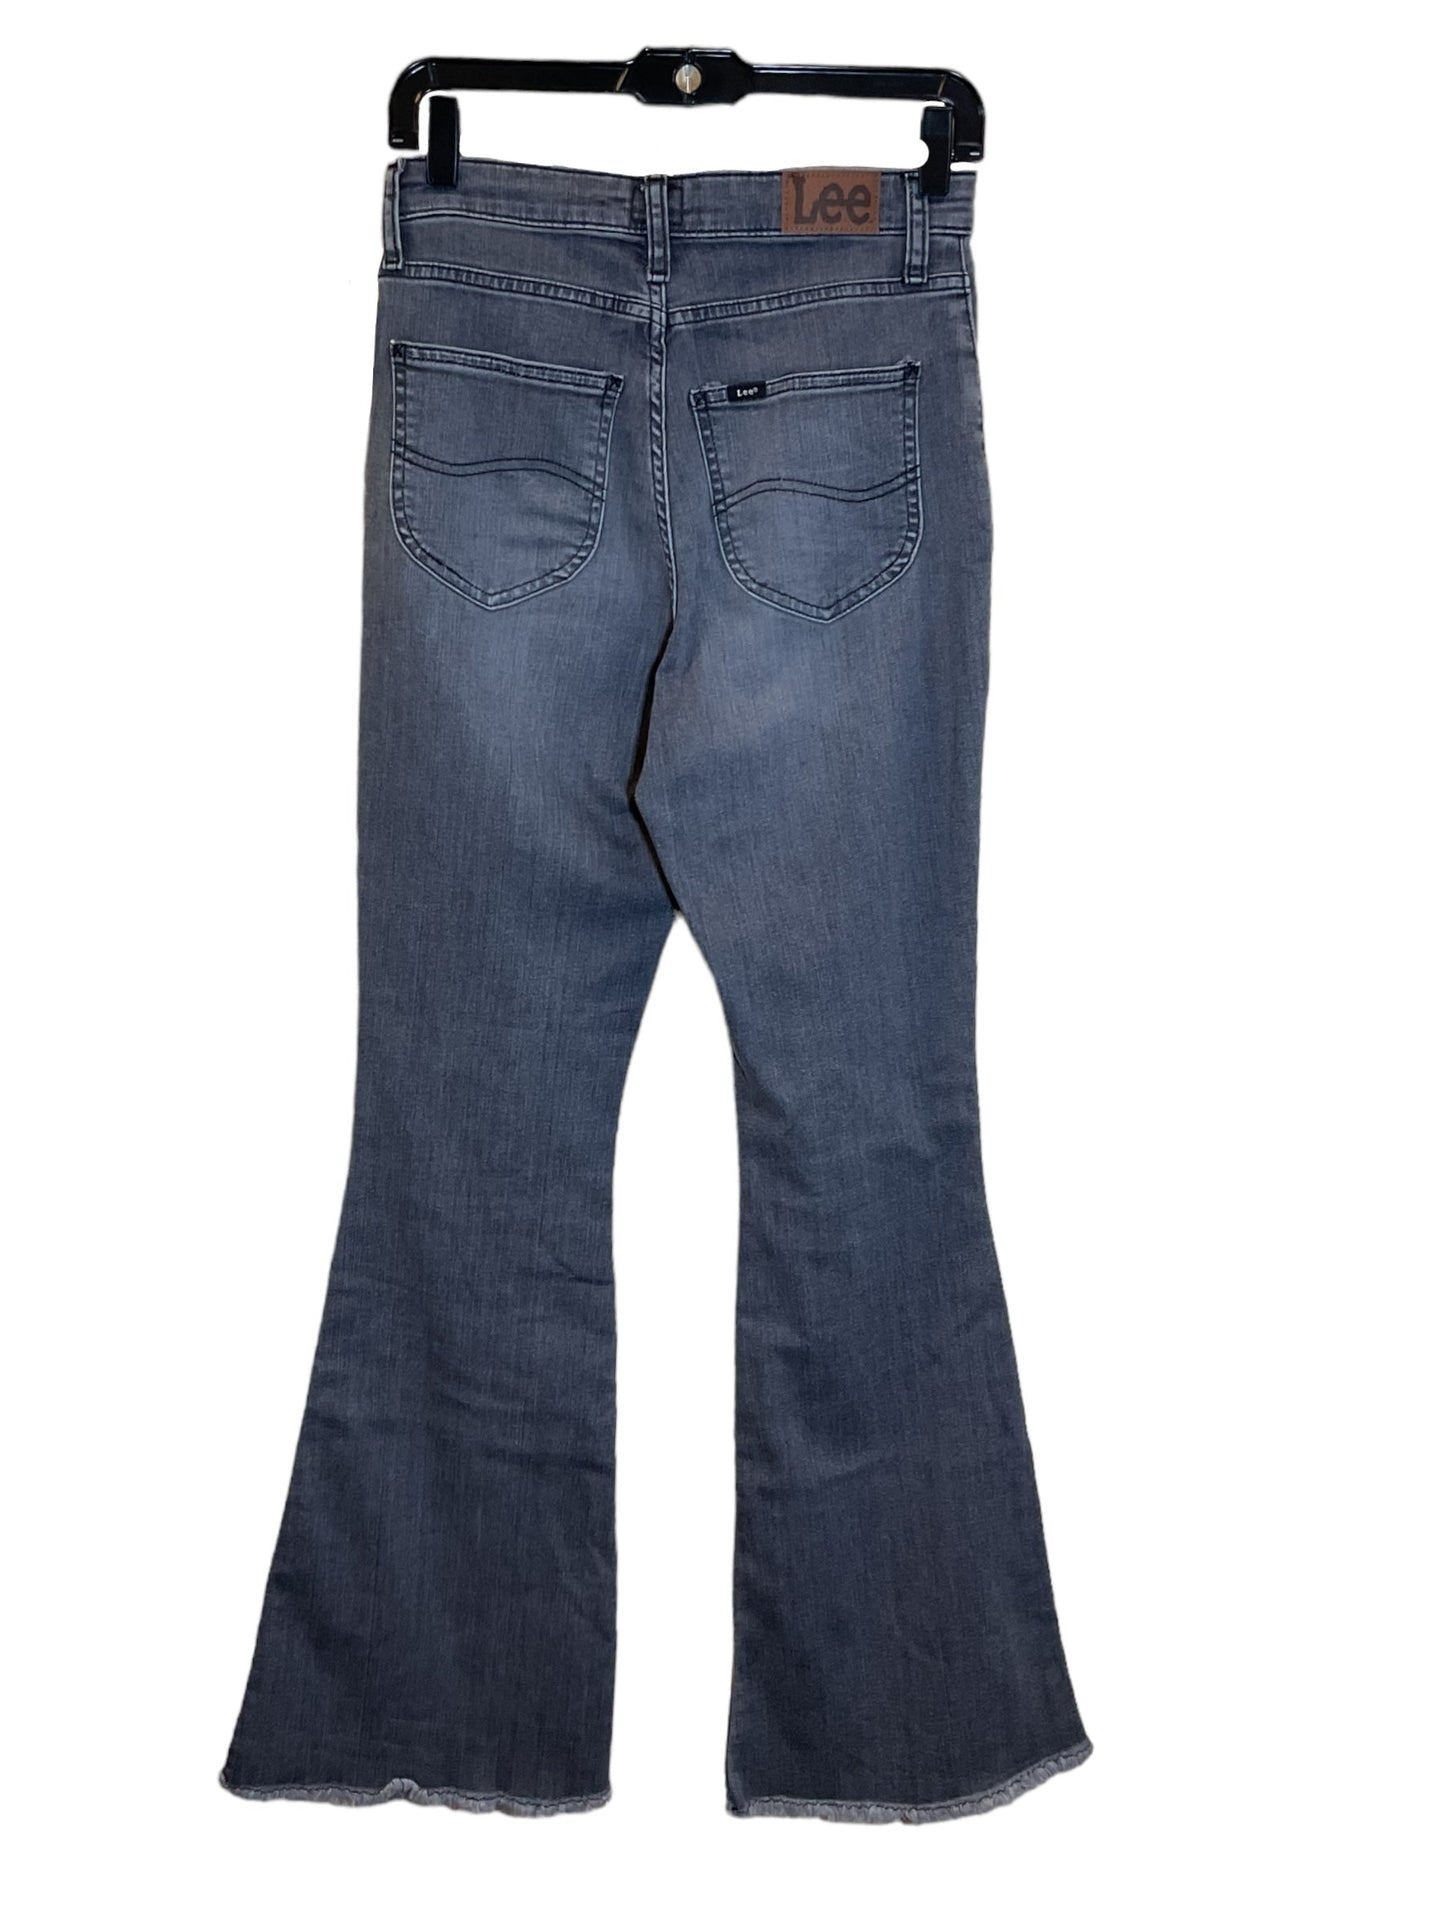 Jeans Flared By Lee  Size: 6